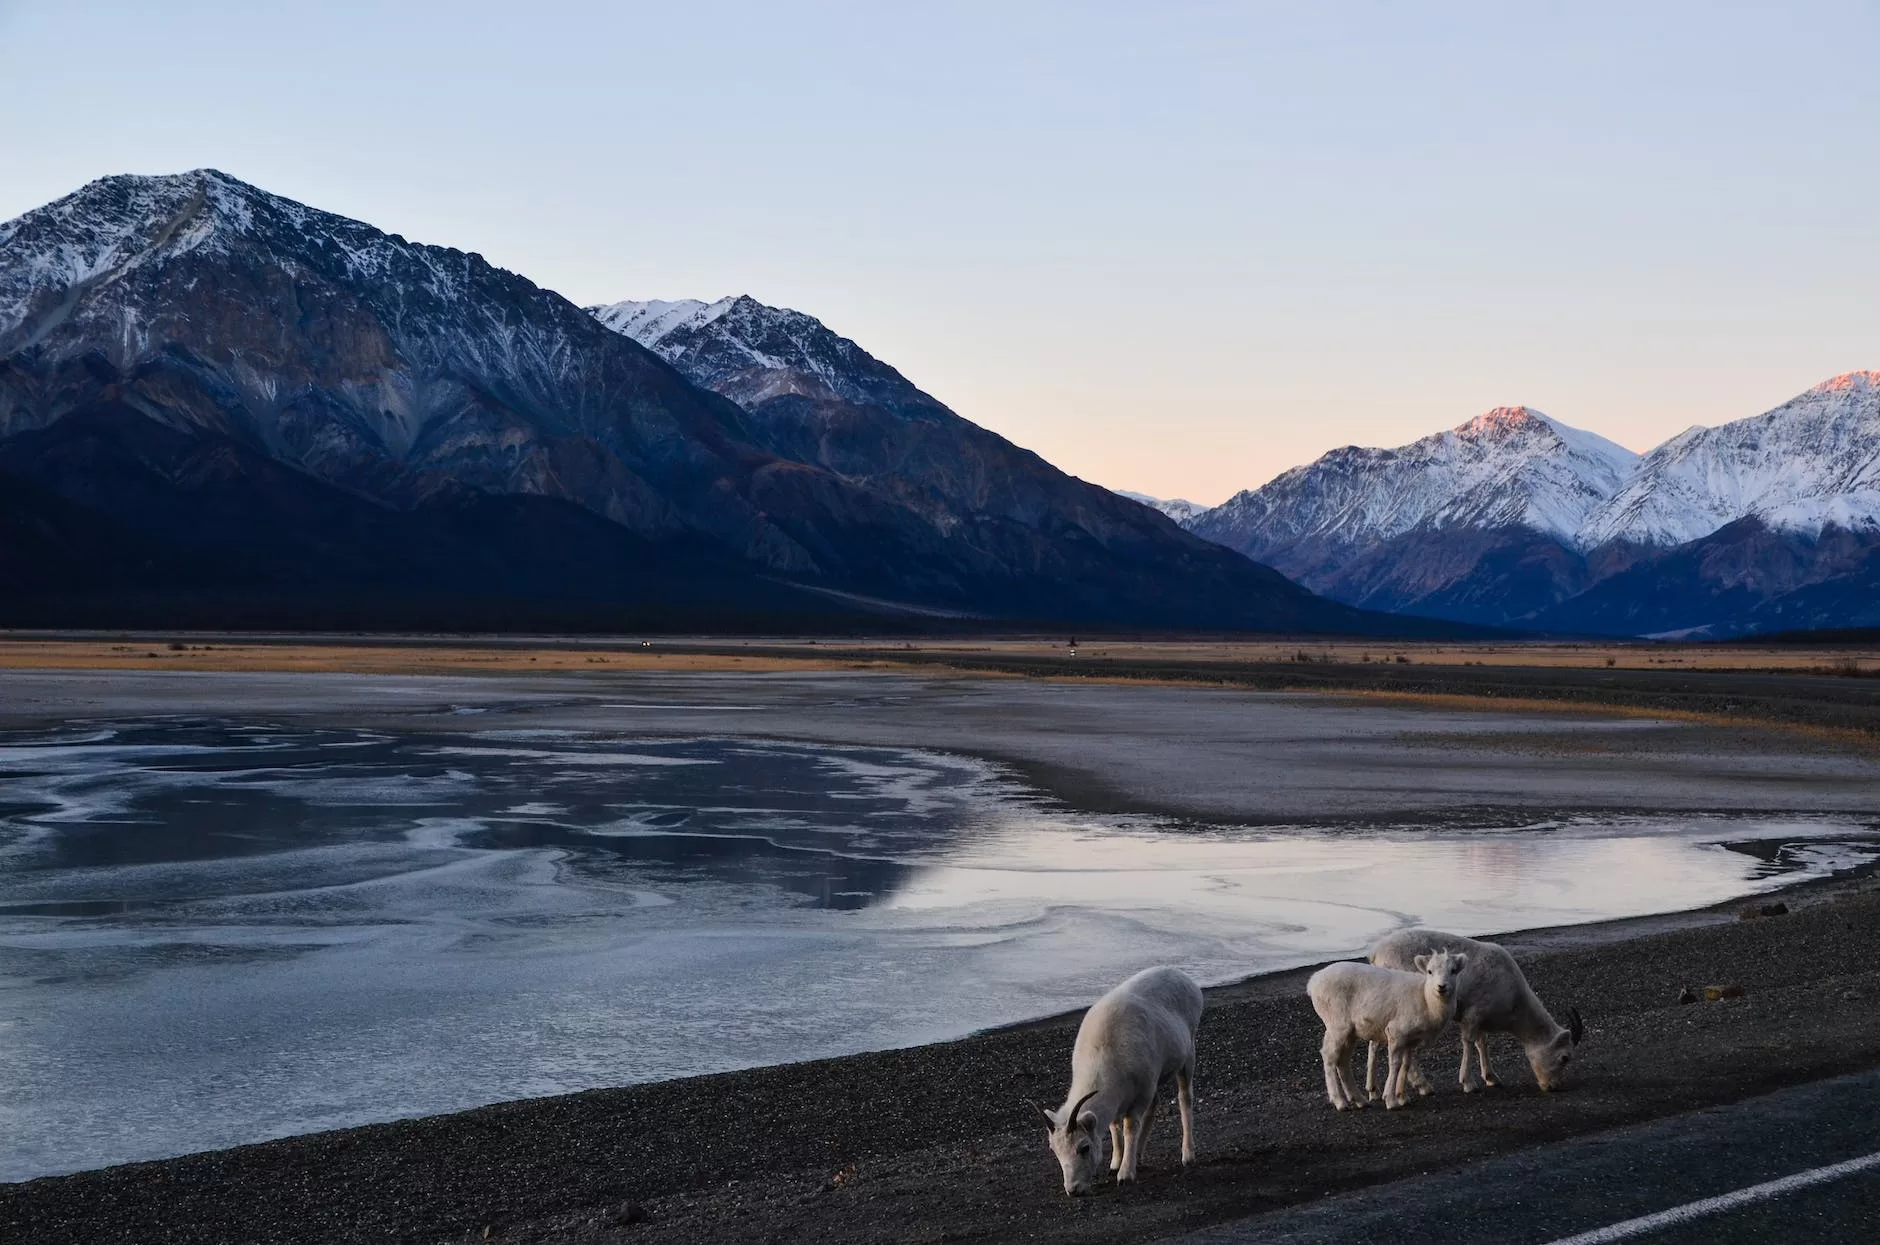 herd of sheep near the snow capped mountains Canada digital nomad